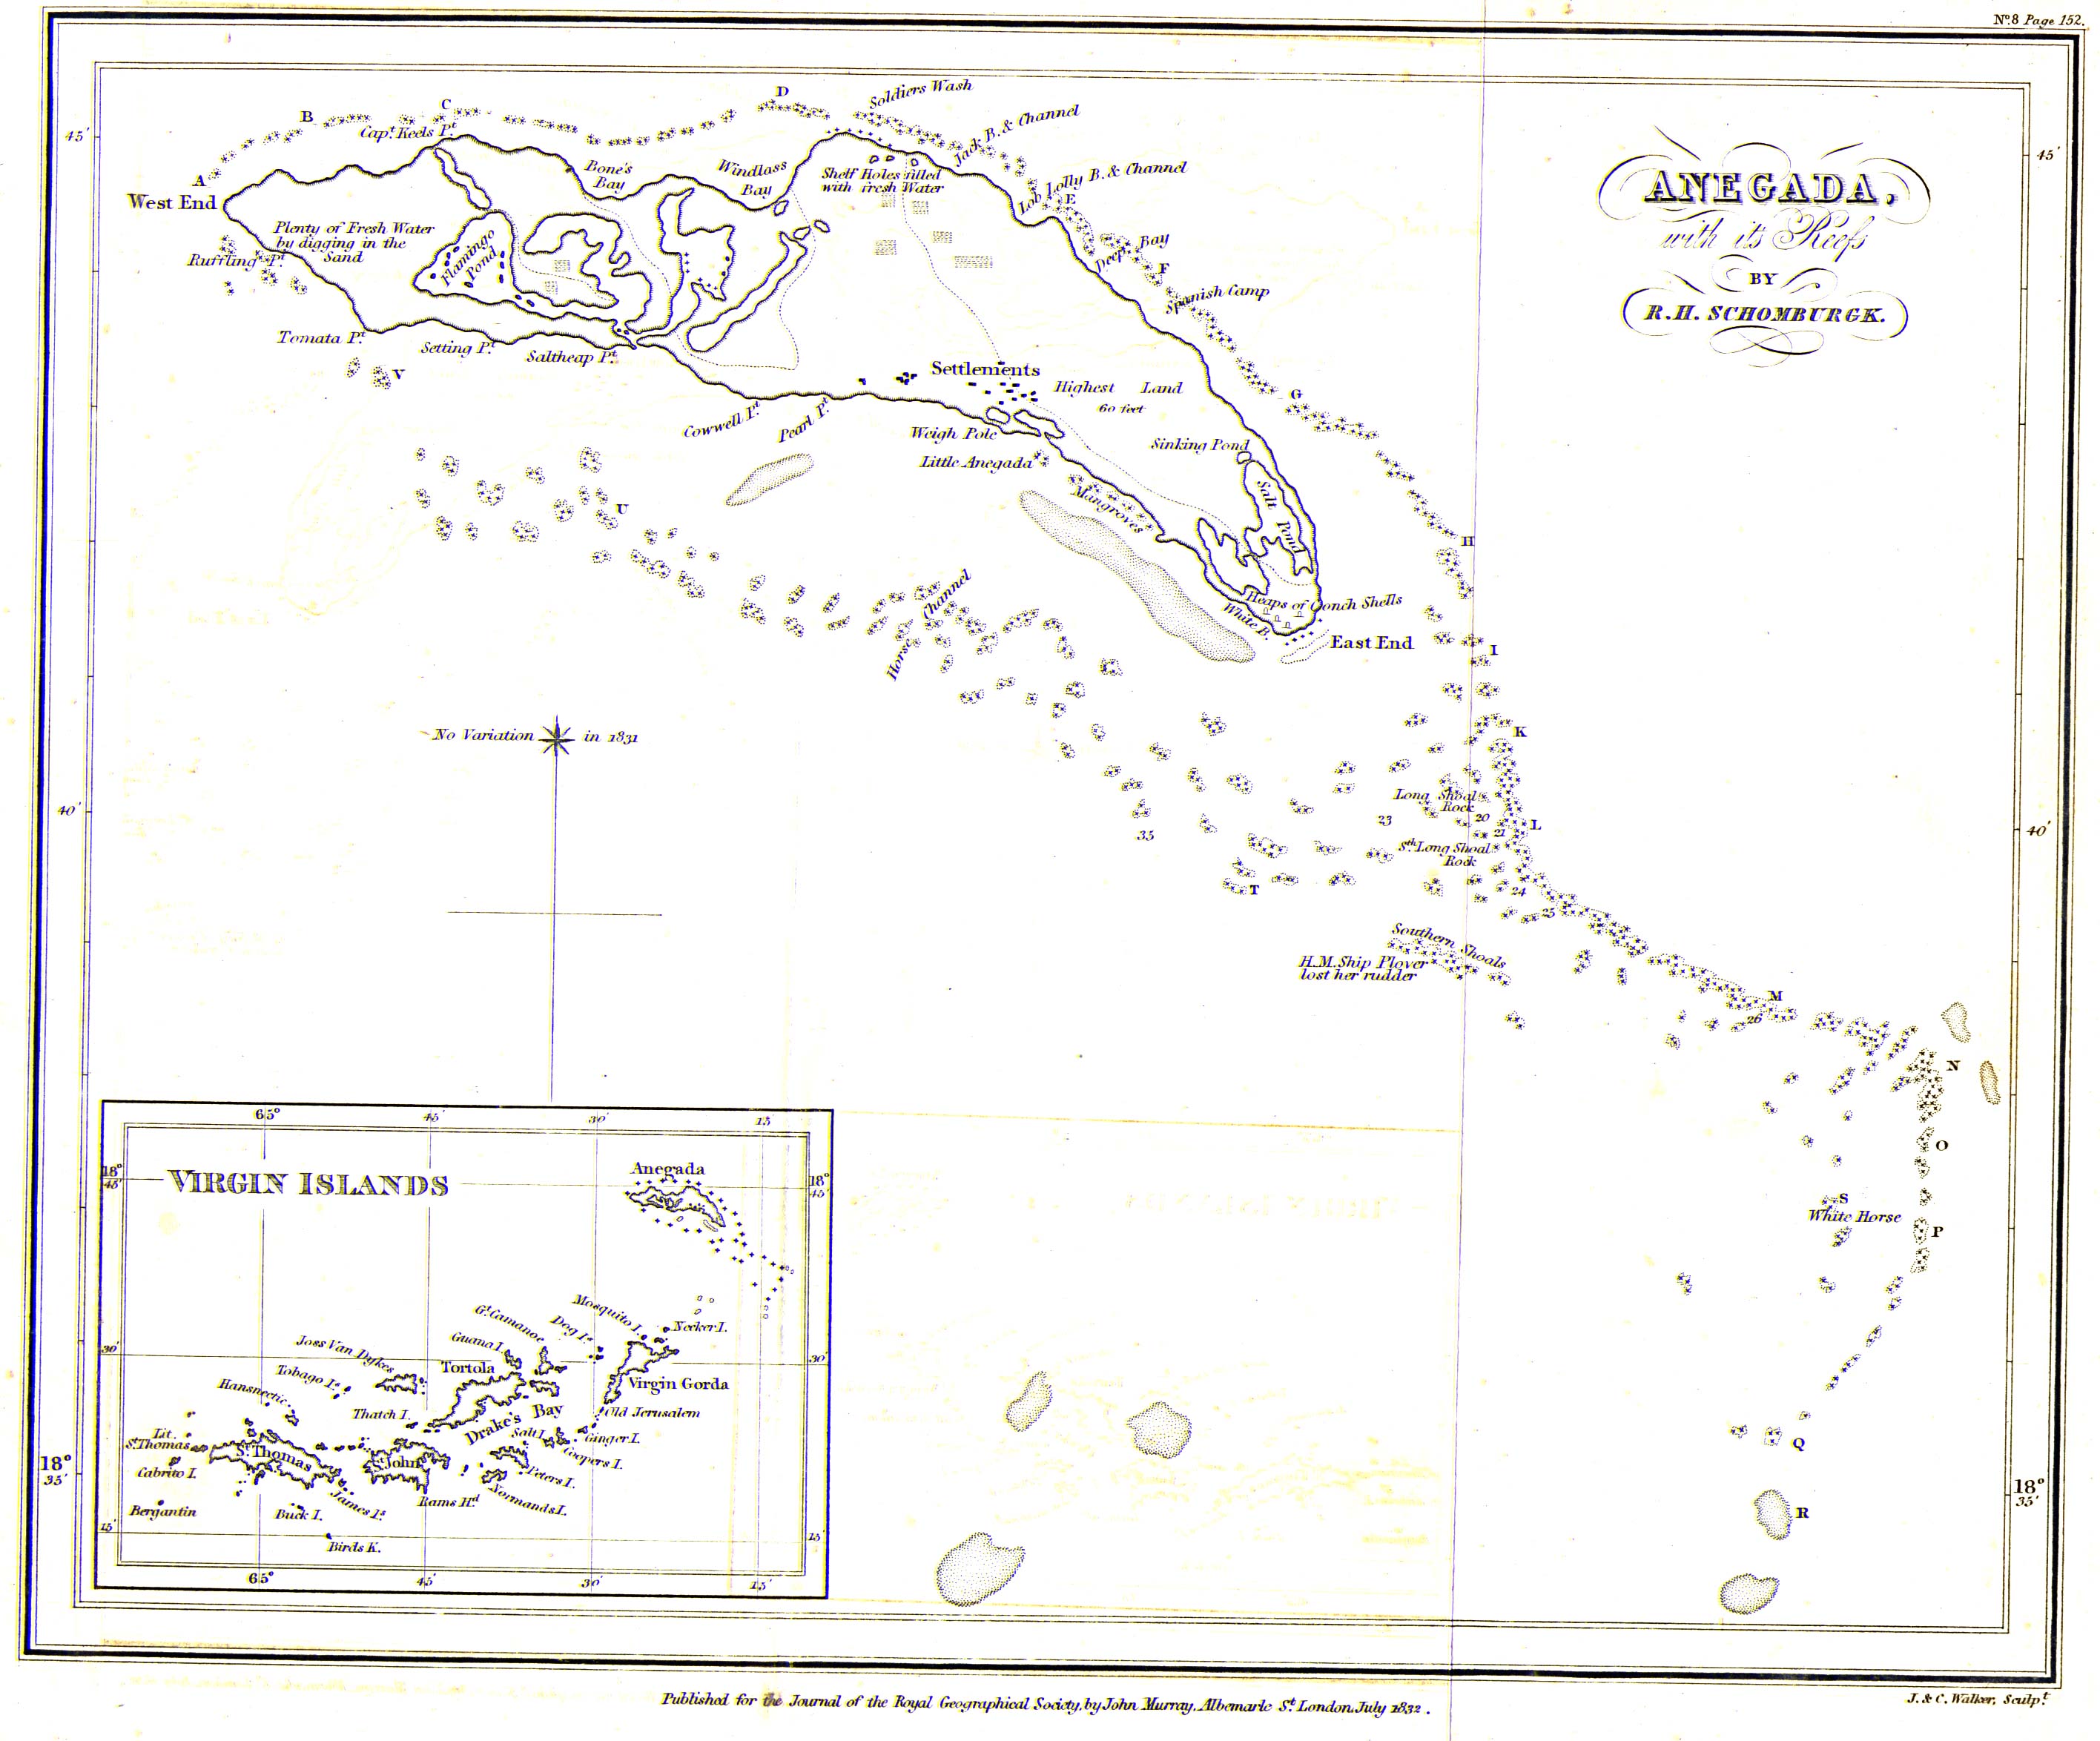 Historical Maps of the Americas. Anegada 1832 [British Virgin Islands] (692K)Anegada with it's Reefs by R.H. Schomburgk from The Journal of the Royal Geographical Society, Volume 2, 1832 to accompany Remarks on Anegada. Communicated by Robert Hermann Schomburgk, Esq., Member of the Horticultural Society of Berlin